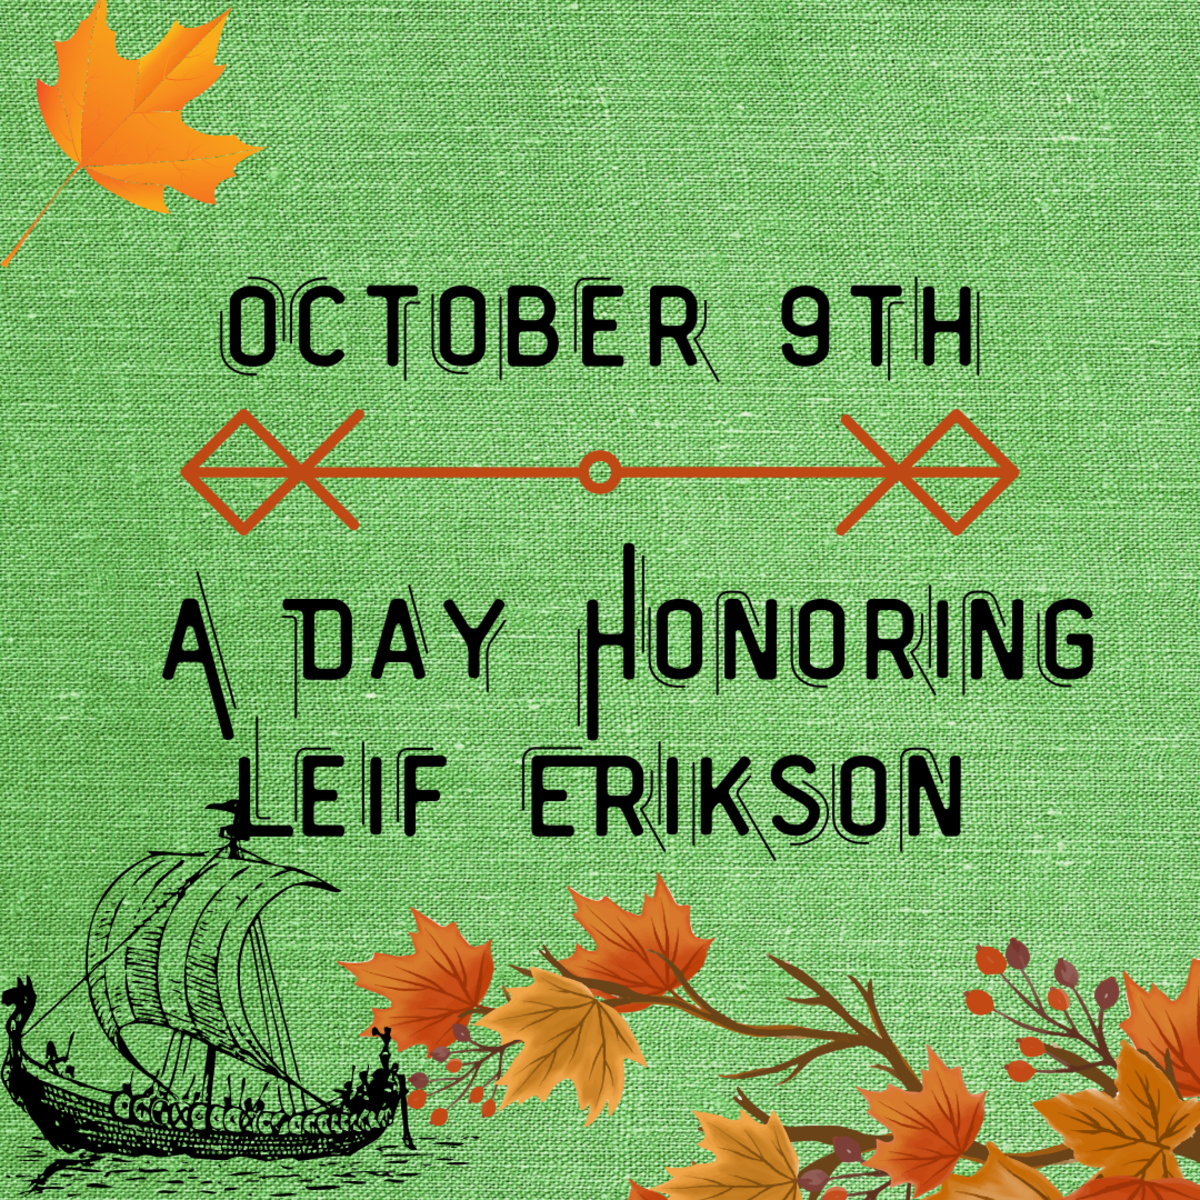 October 9th: A Day Honoring Leif Erikson